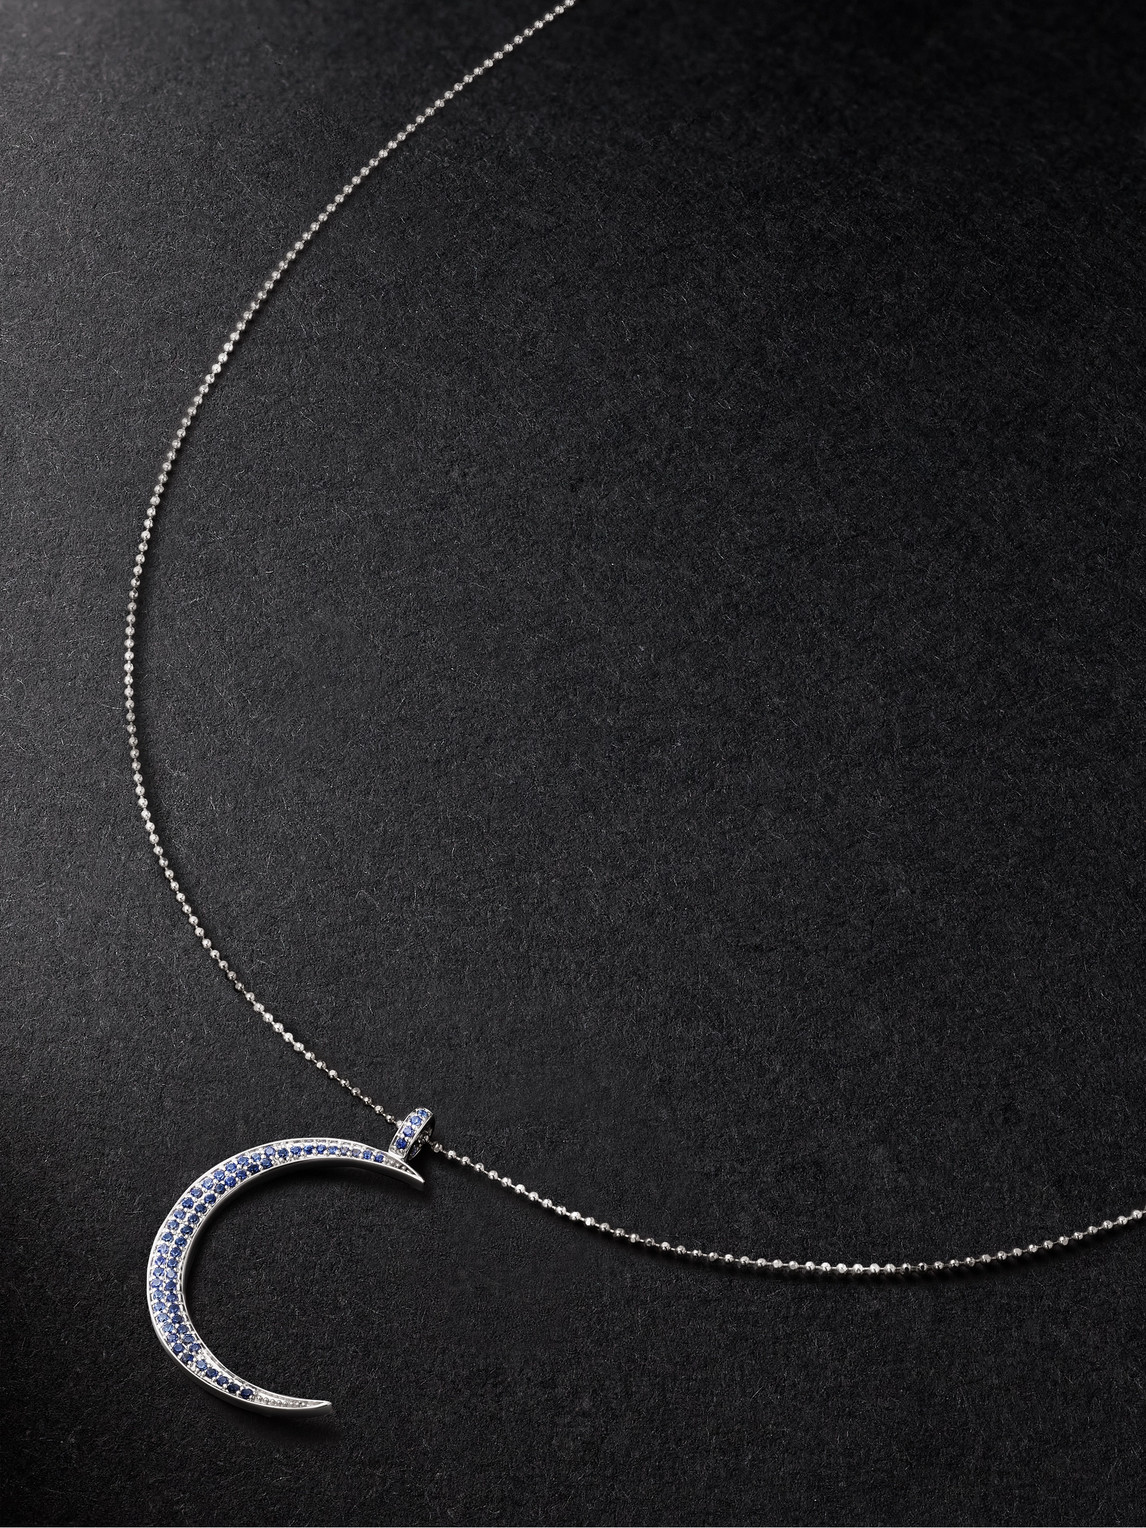 Sydney Evan Large Moon White Gold Sapphire Necklace In Silver